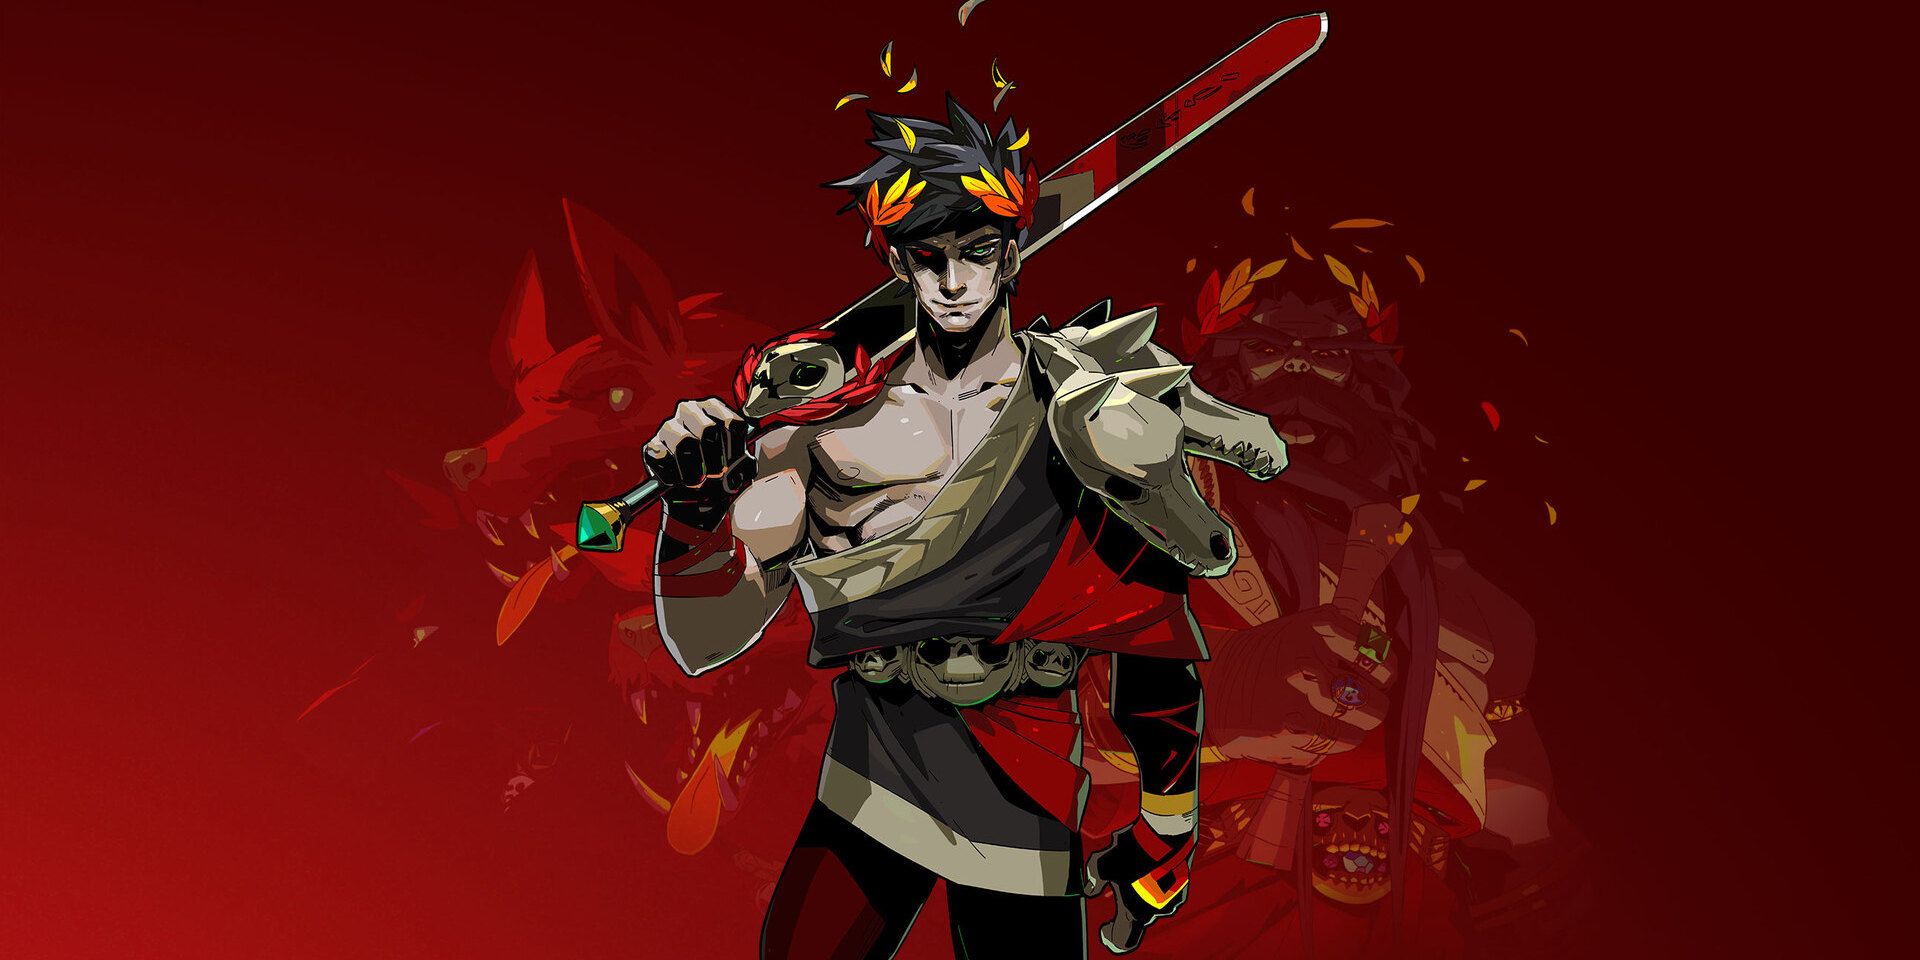 Zagreus wielding his sword against a red background in the Hades game